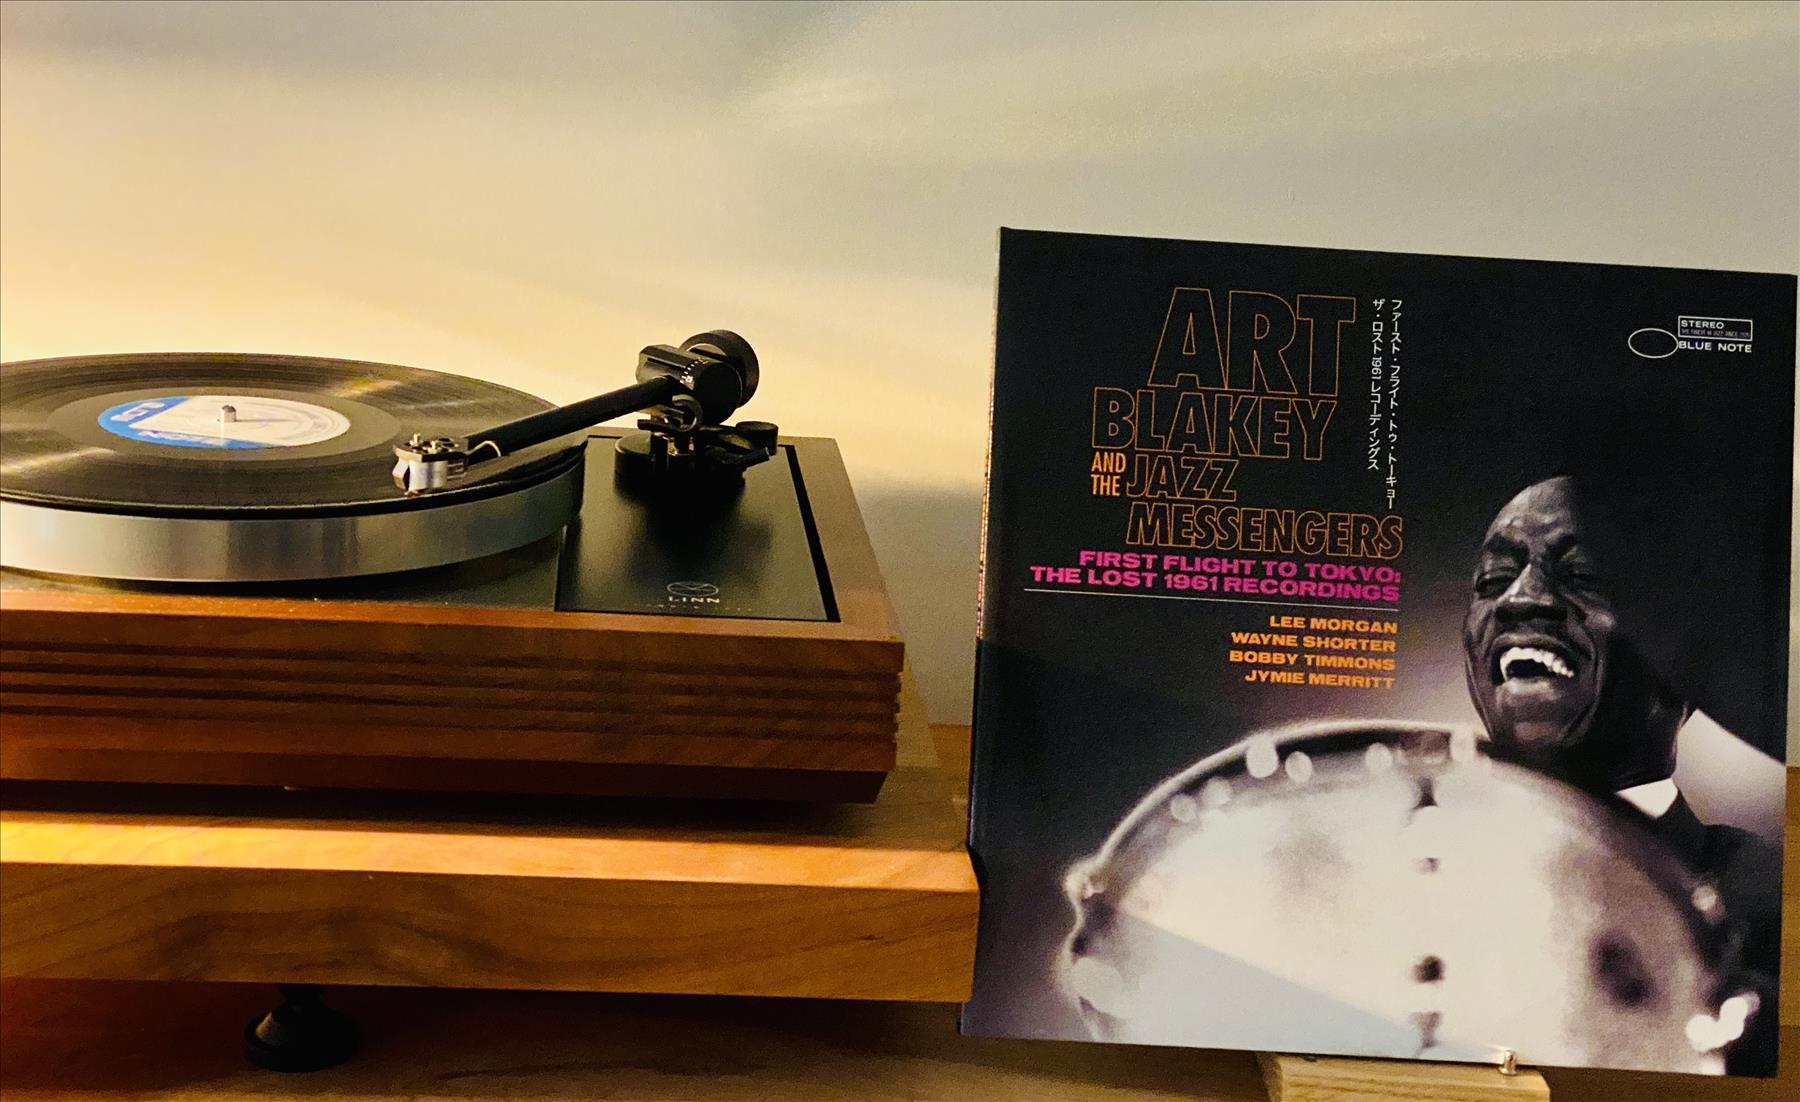 Art Blakey And The Jazz Messengers / First Flight to Tokyo:The Lost 1961 Recordings